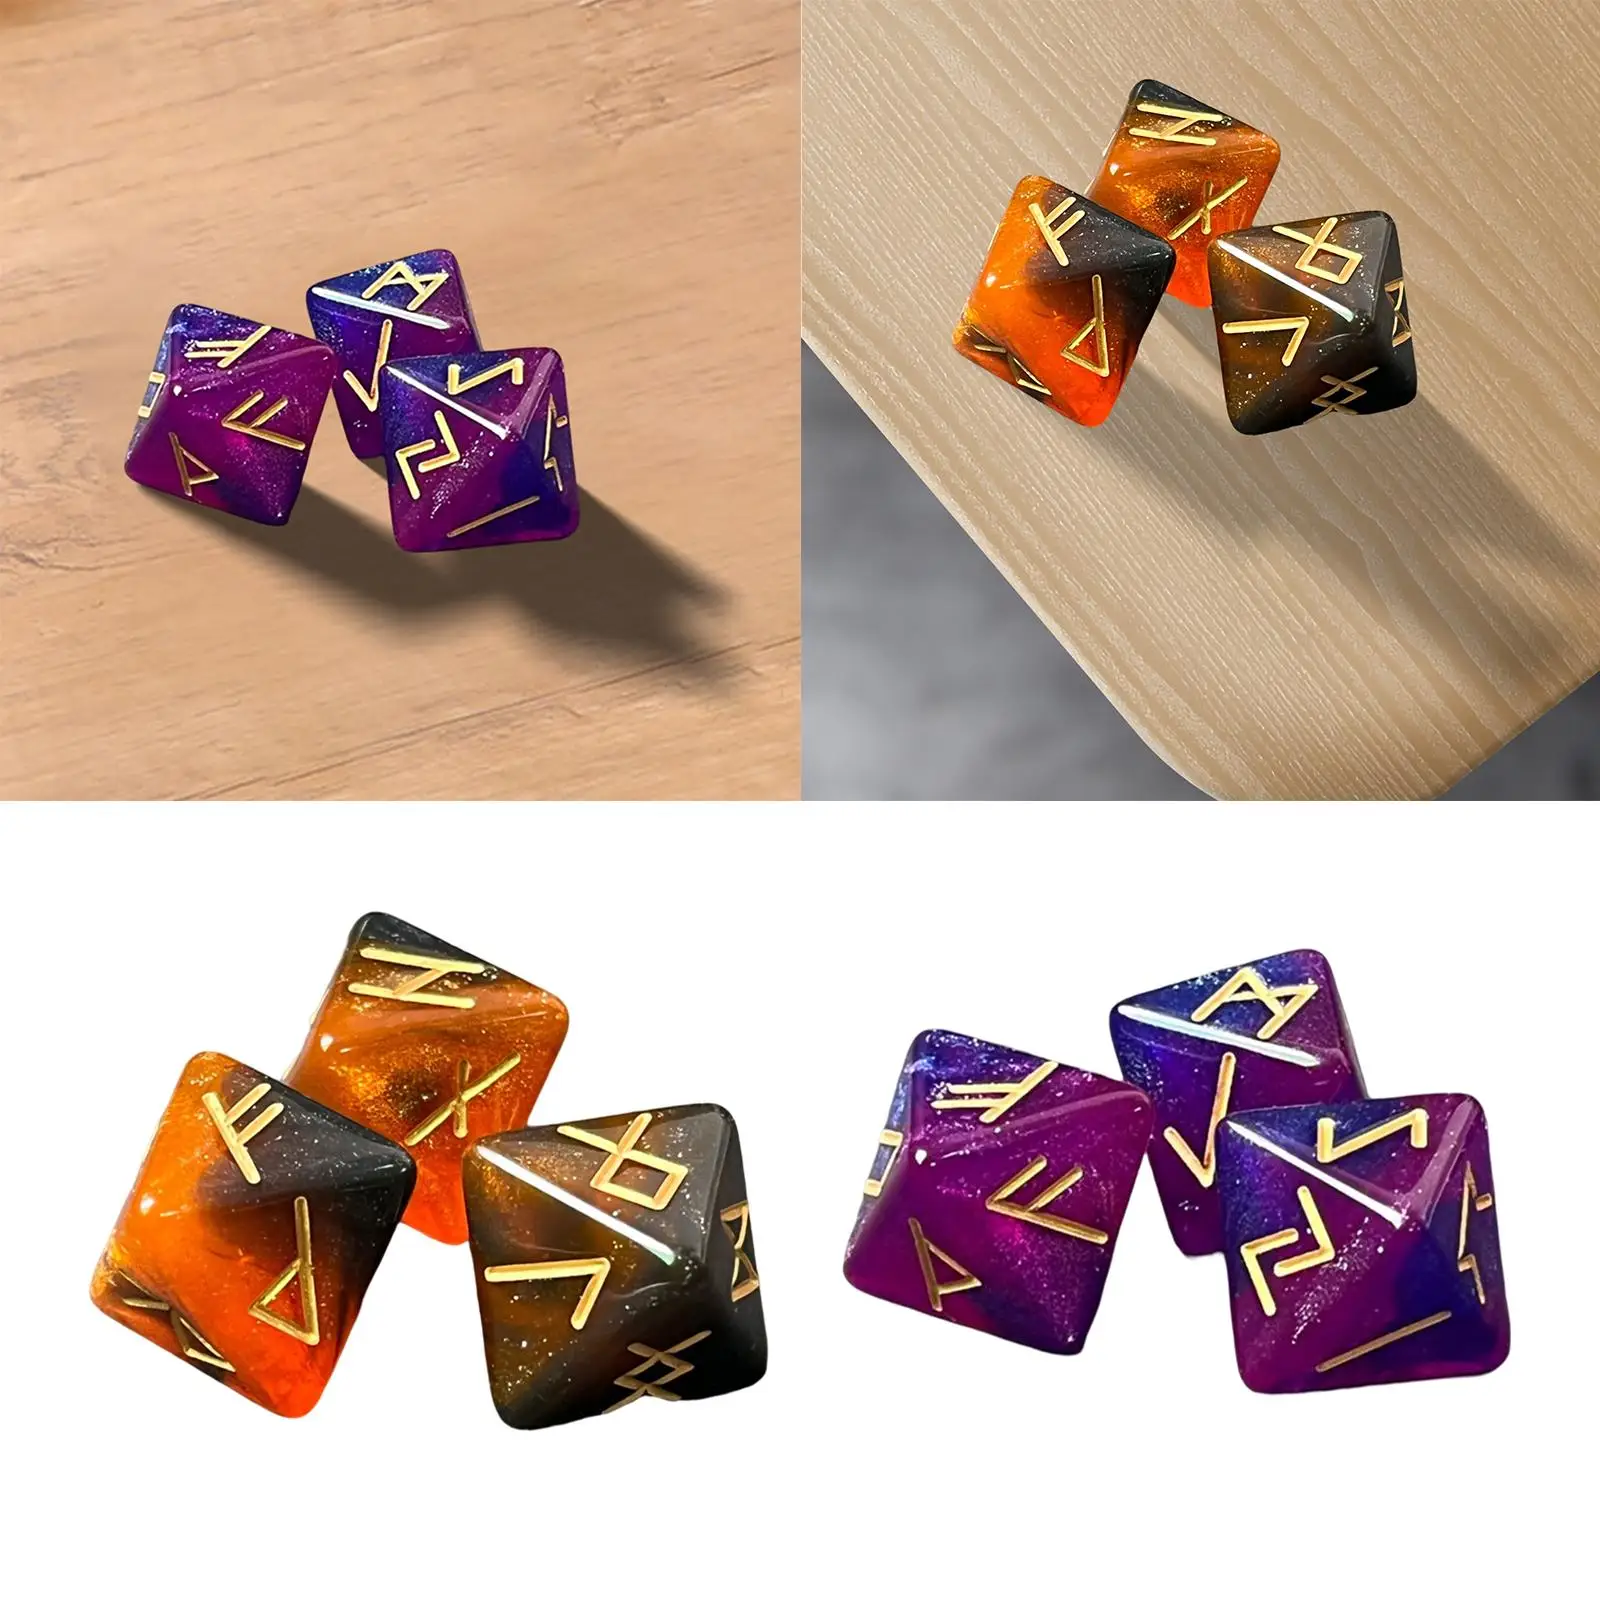 3Pcs Polyhedral Rune Dice Leisure and Entertainment Toys Star Divination Tarot Constellation Rune Dice for Role Playing Games